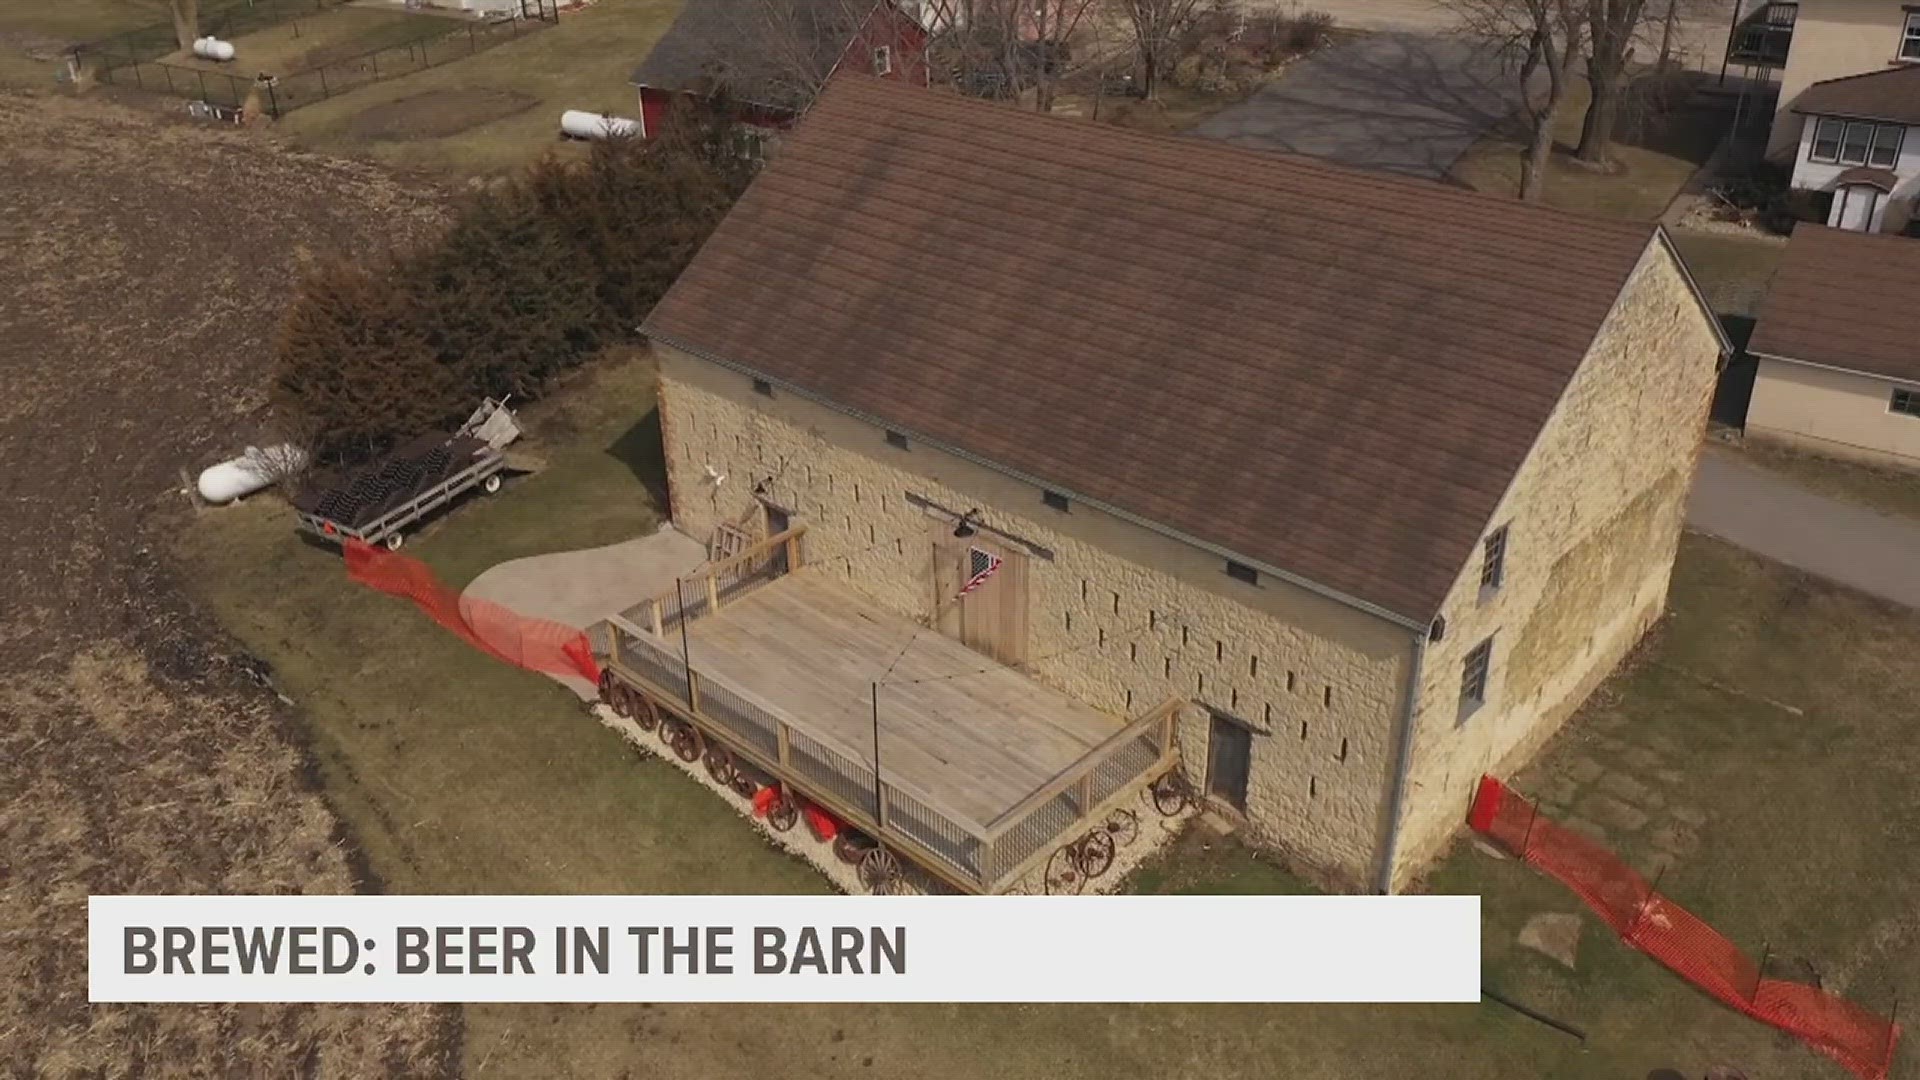 Built in 1839, Beer in the Barn is the oldest Iowa barn. Co-owner Kari Vize talks about why it is important to her to maintain the original structure of the barn.